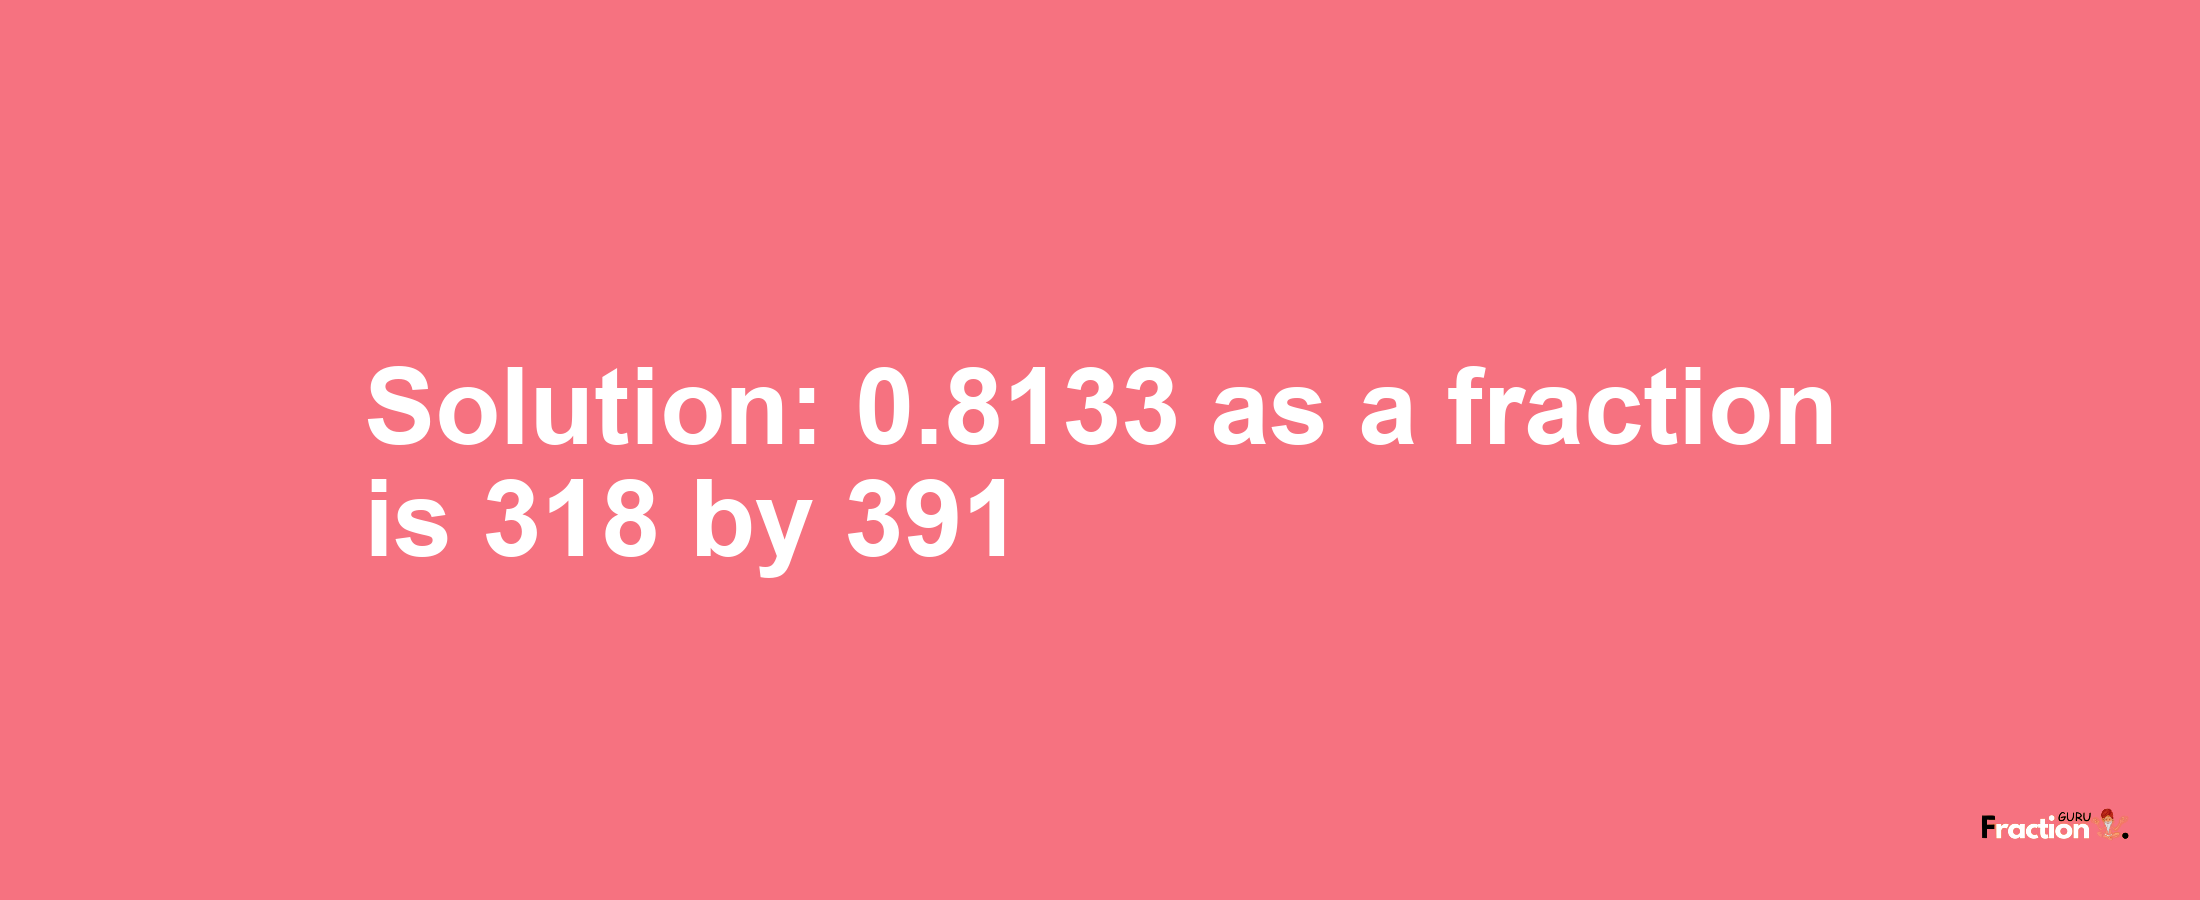 Solution:0.8133 as a fraction is 318/391